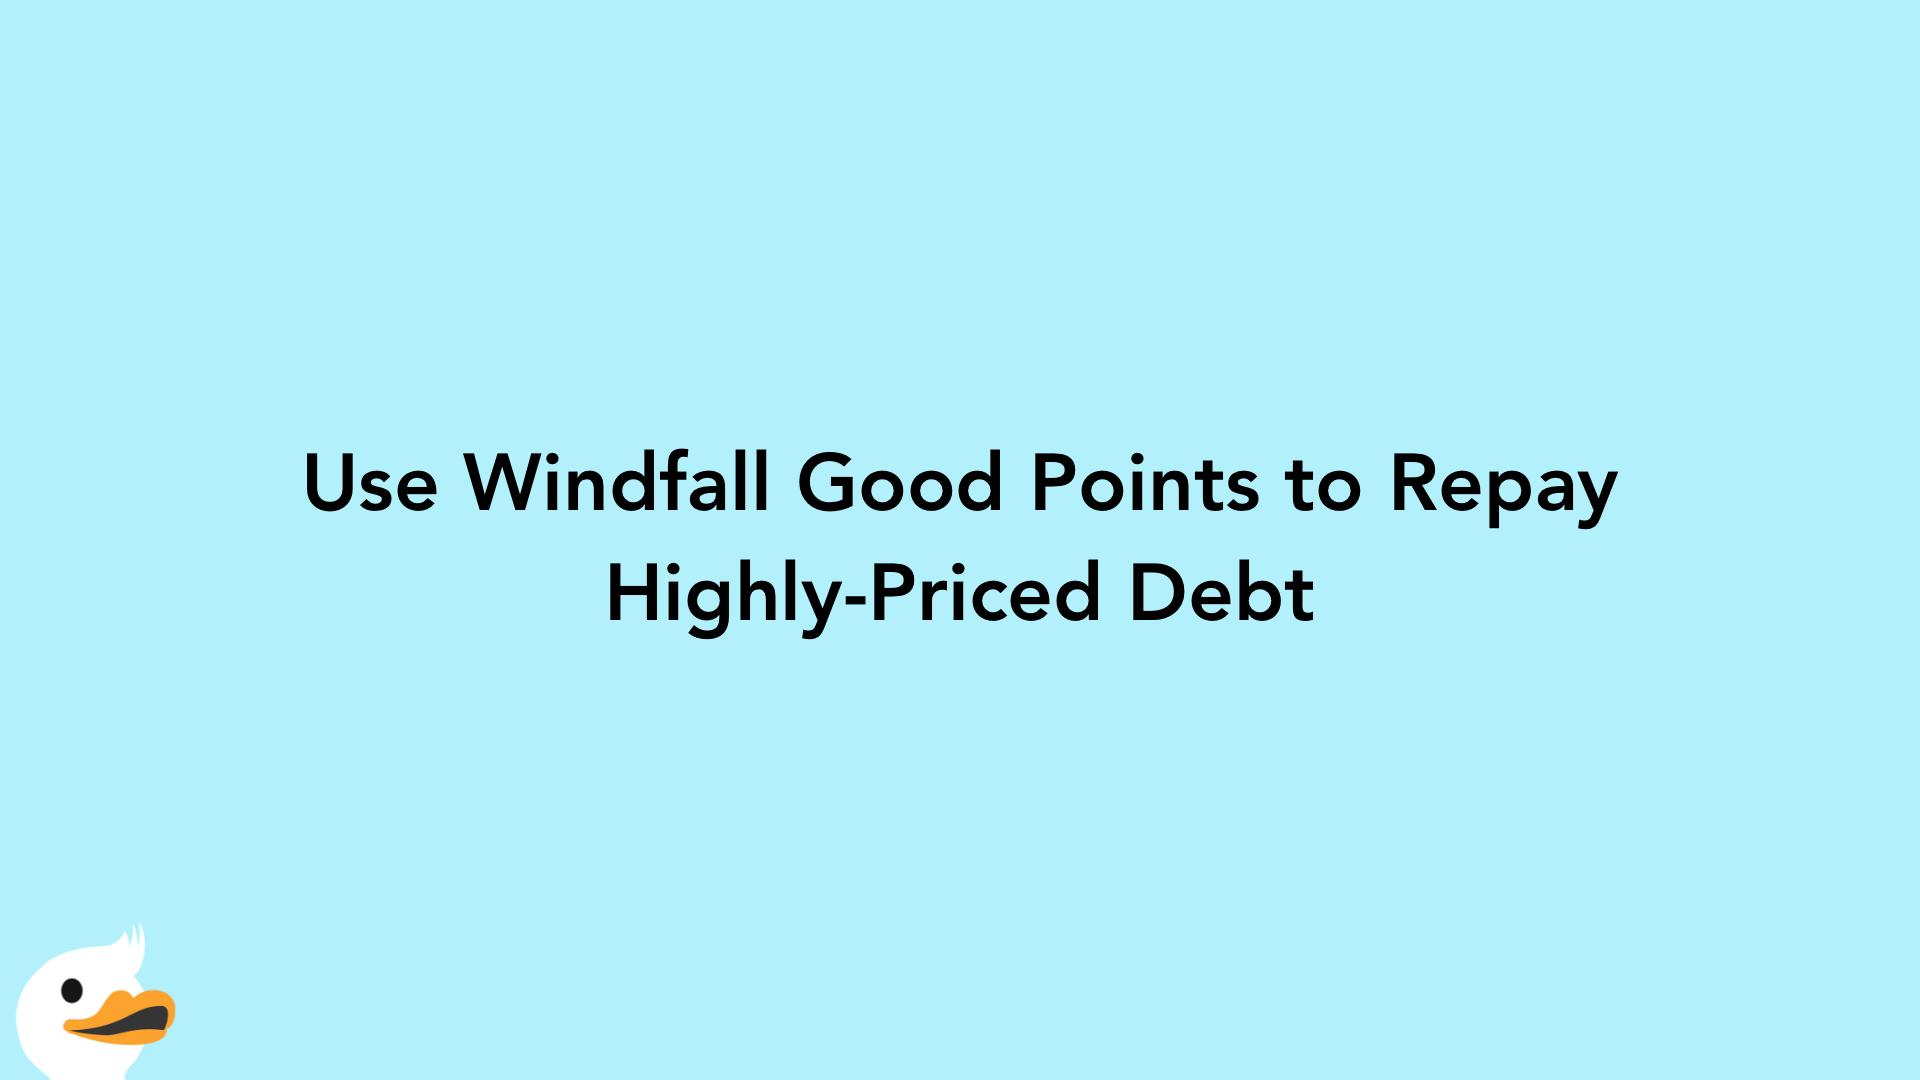 Use Windfall Good Points to Repay Highly-Priced Debt